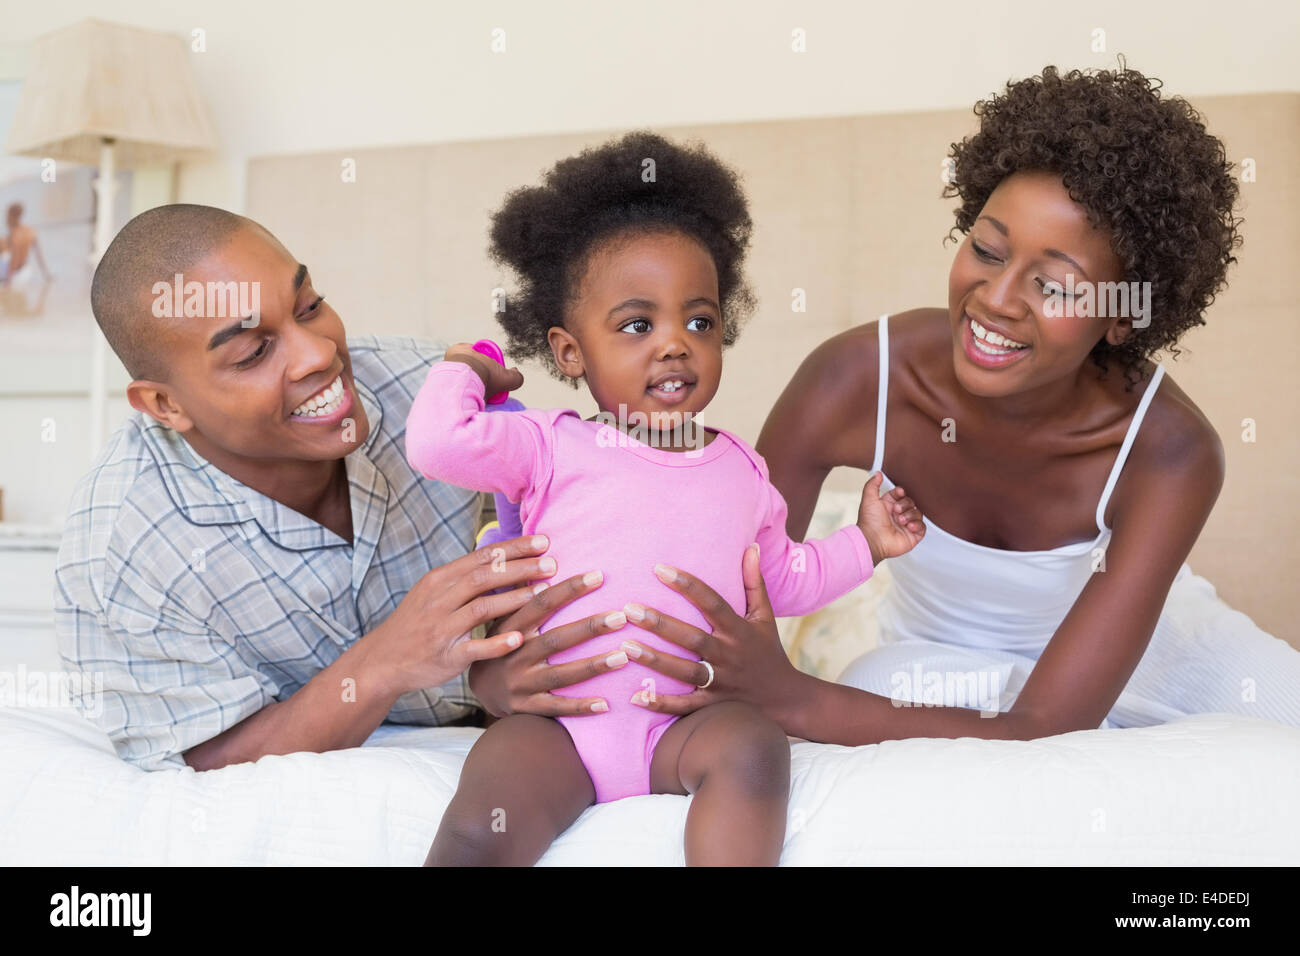 Happy parents playing with baby girl on bed together Stock Photo